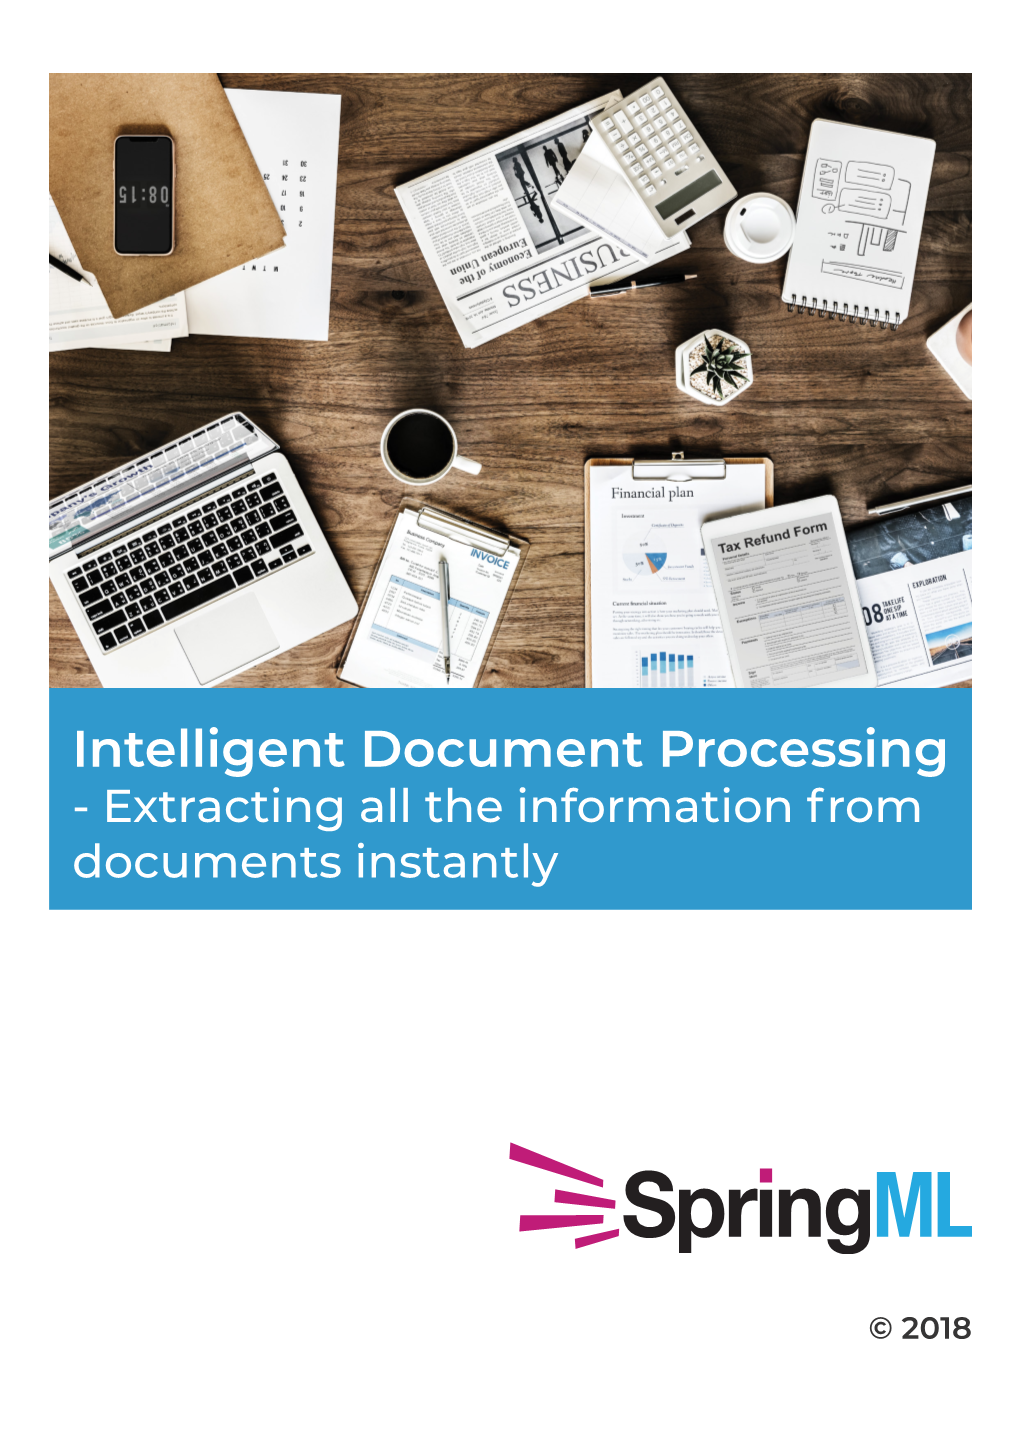 Intelligent Document Processing - Extracting All the Information from Documents Instantly